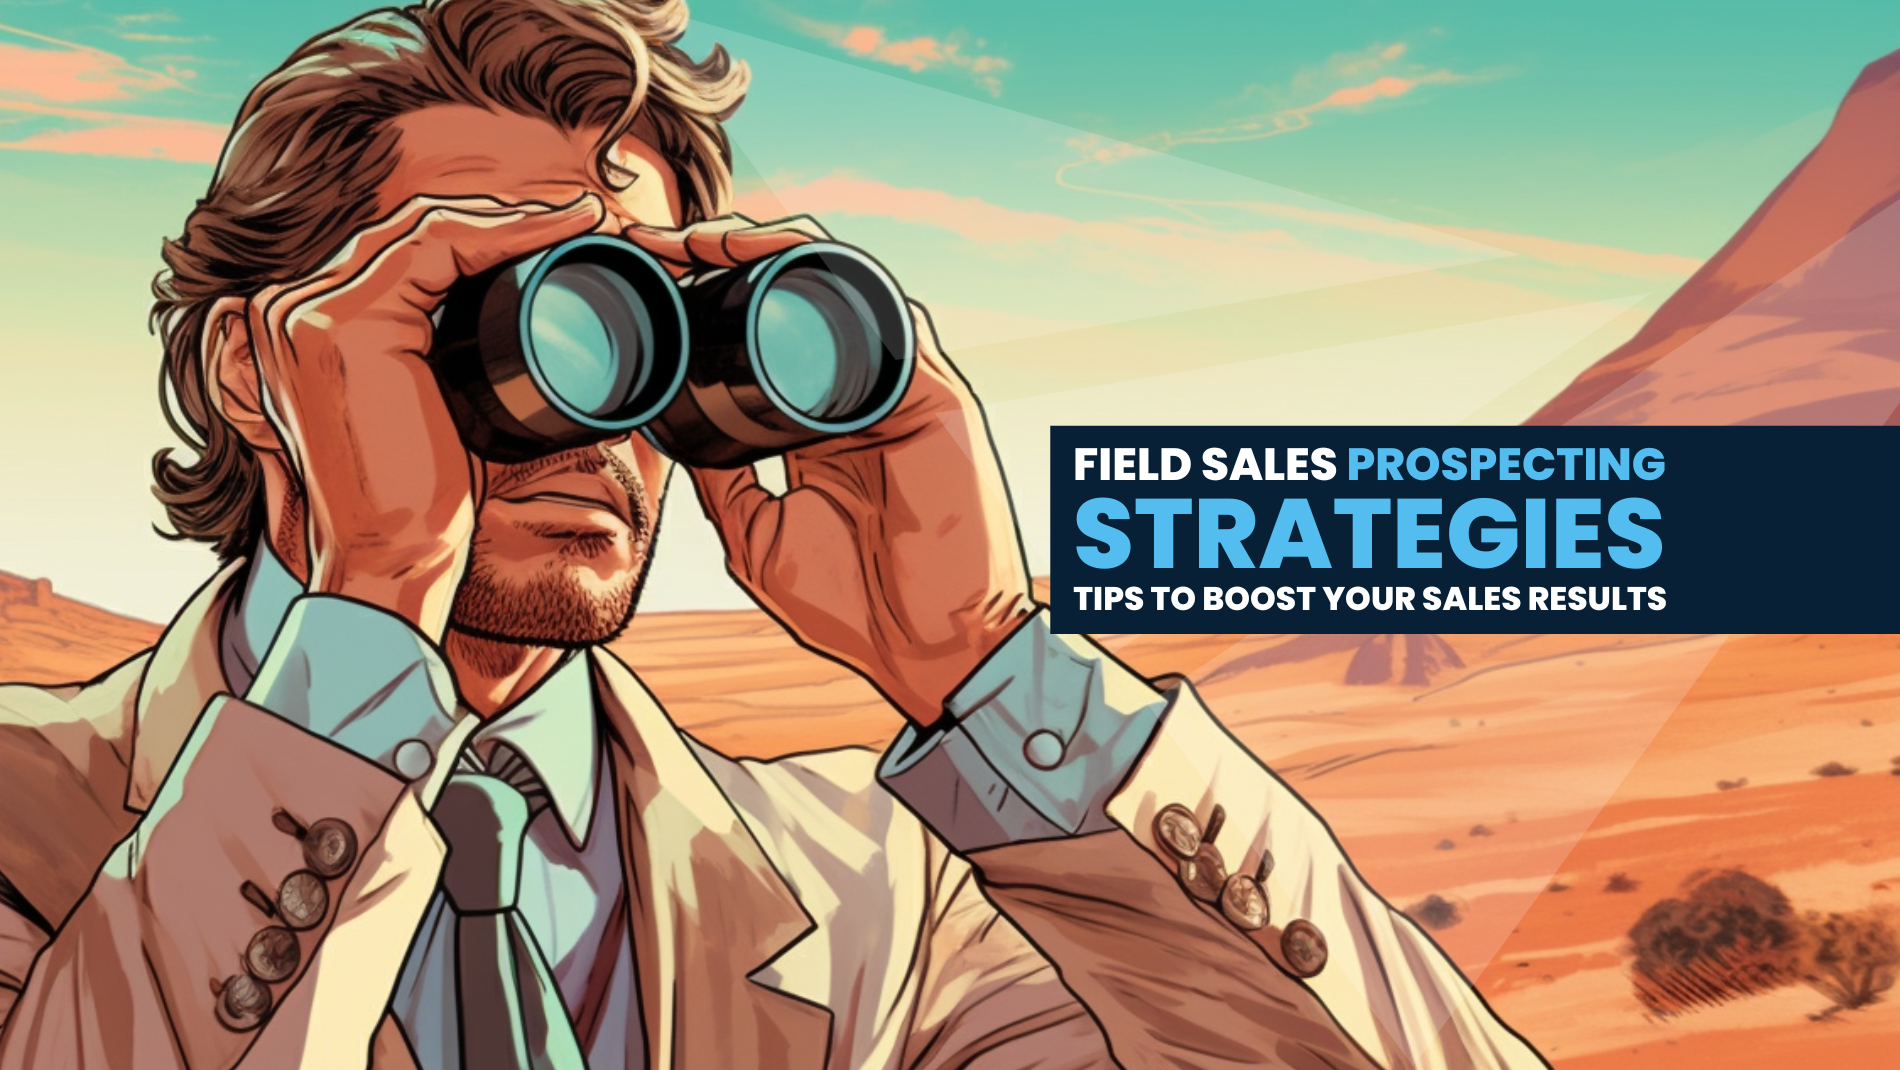 Field Sales Prospecting Strategies: Tips to Boost Your Sales Results